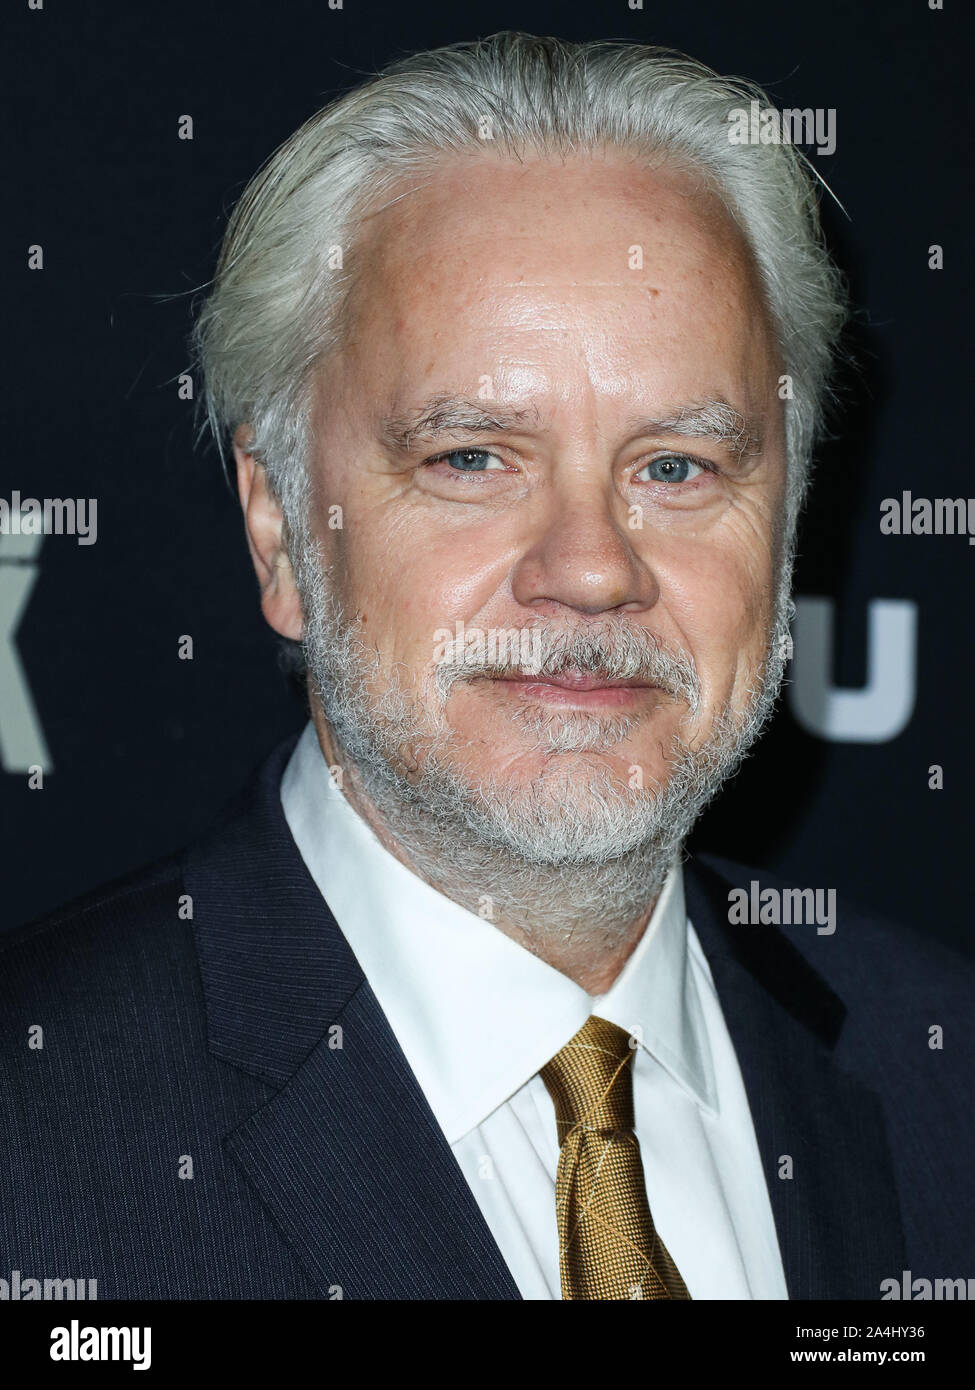 WEST HOLLYWOOD, LOS ANGELES, CALIFORNIA, USA - OCTOBER 14: Actor Tim Robbins  arrives at the Los Angeles Premiere Of Hulu's 'Castle Rock' Season 2 held  at AMC Sunset 5 on October 14,